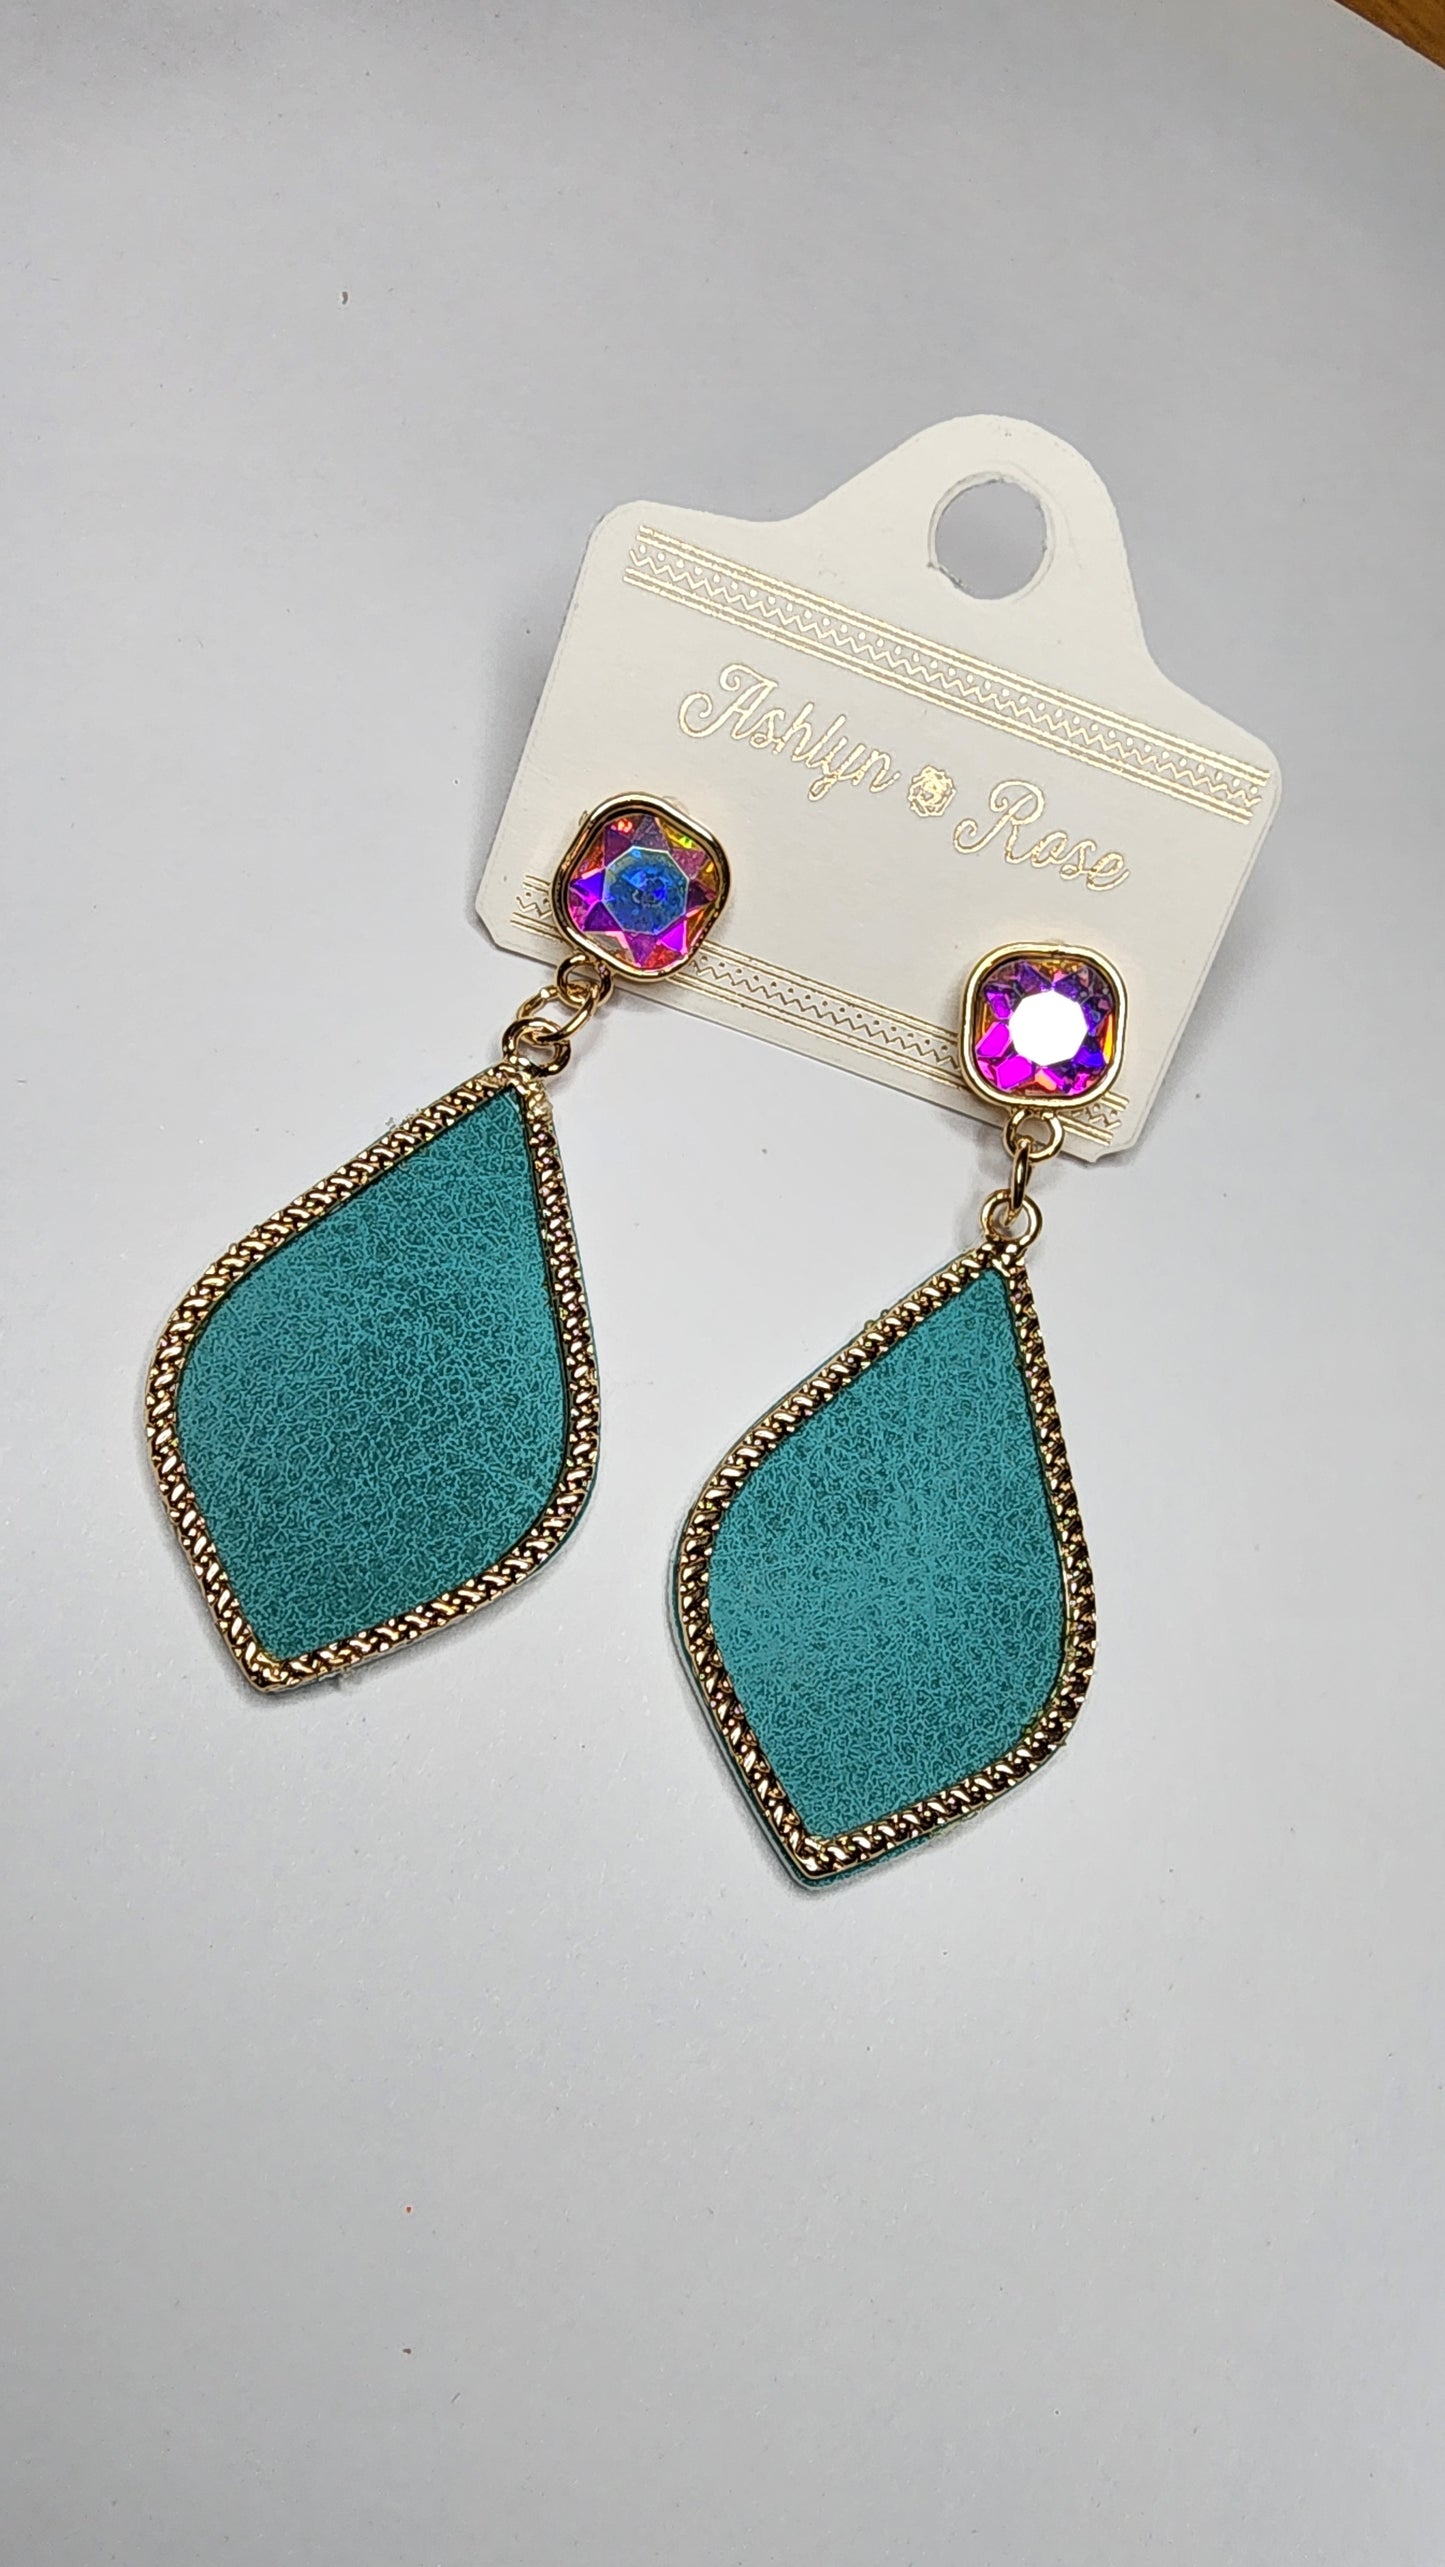 Too Strong to be Dainty Teardrop Earrings with Gold Casing, Turquoise